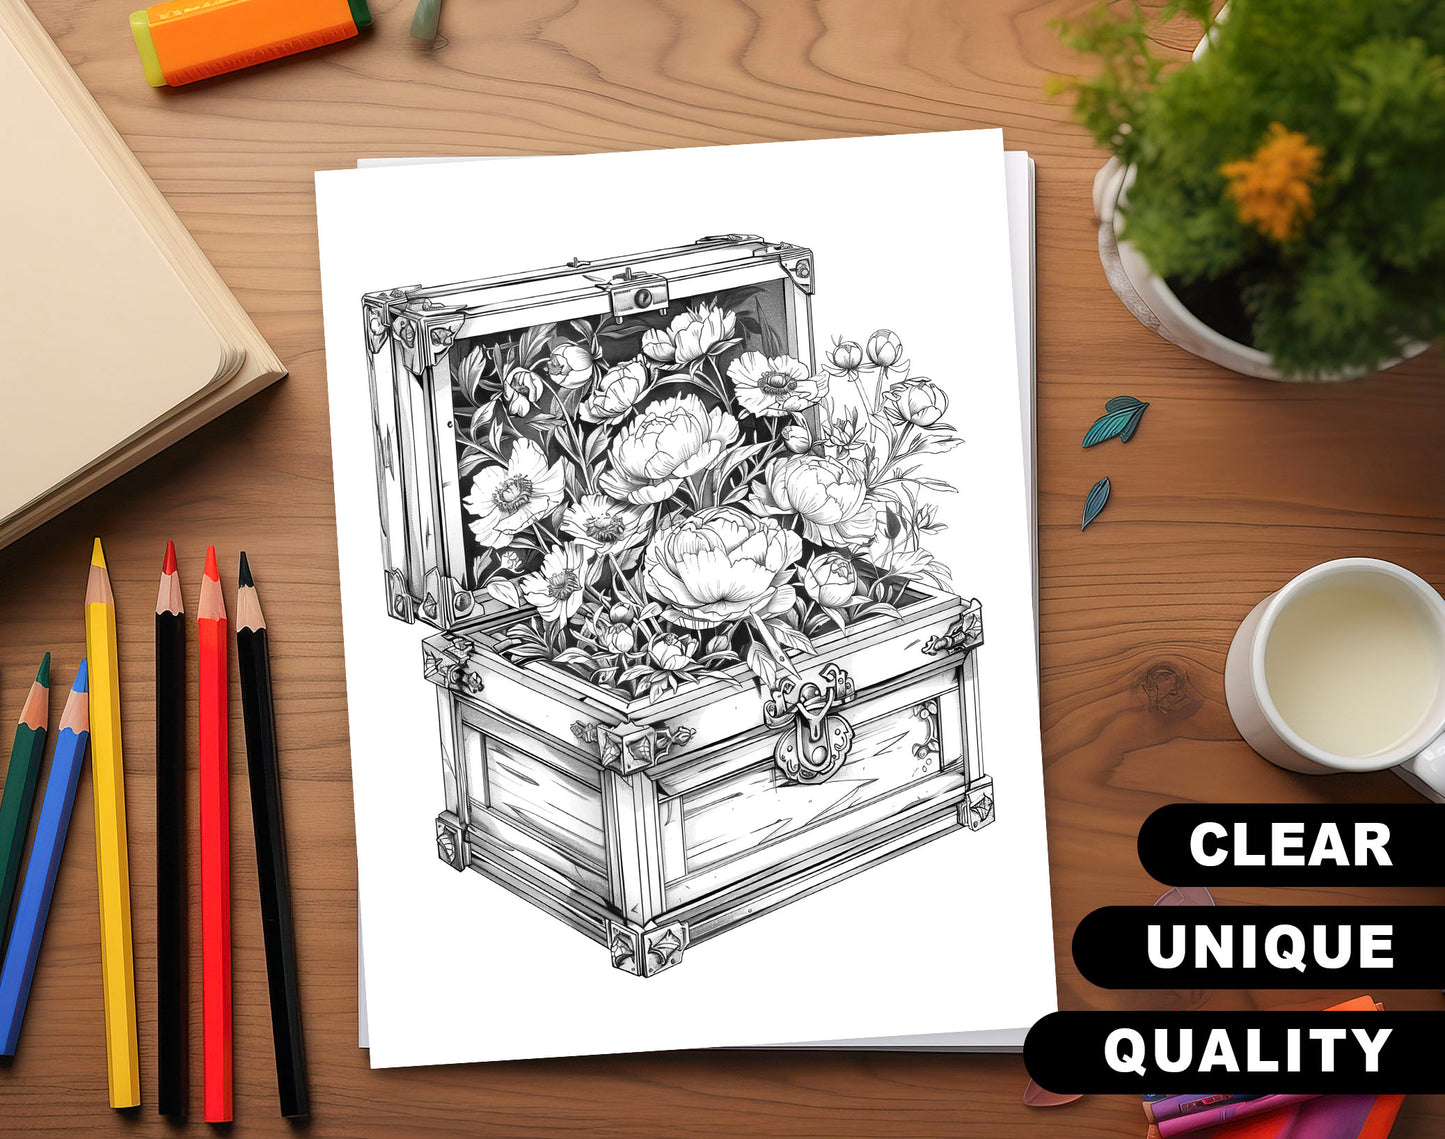 50 Flower Chest Box Grayscale Coloring Pages - Instant Download - Printable PDF Dark/Light